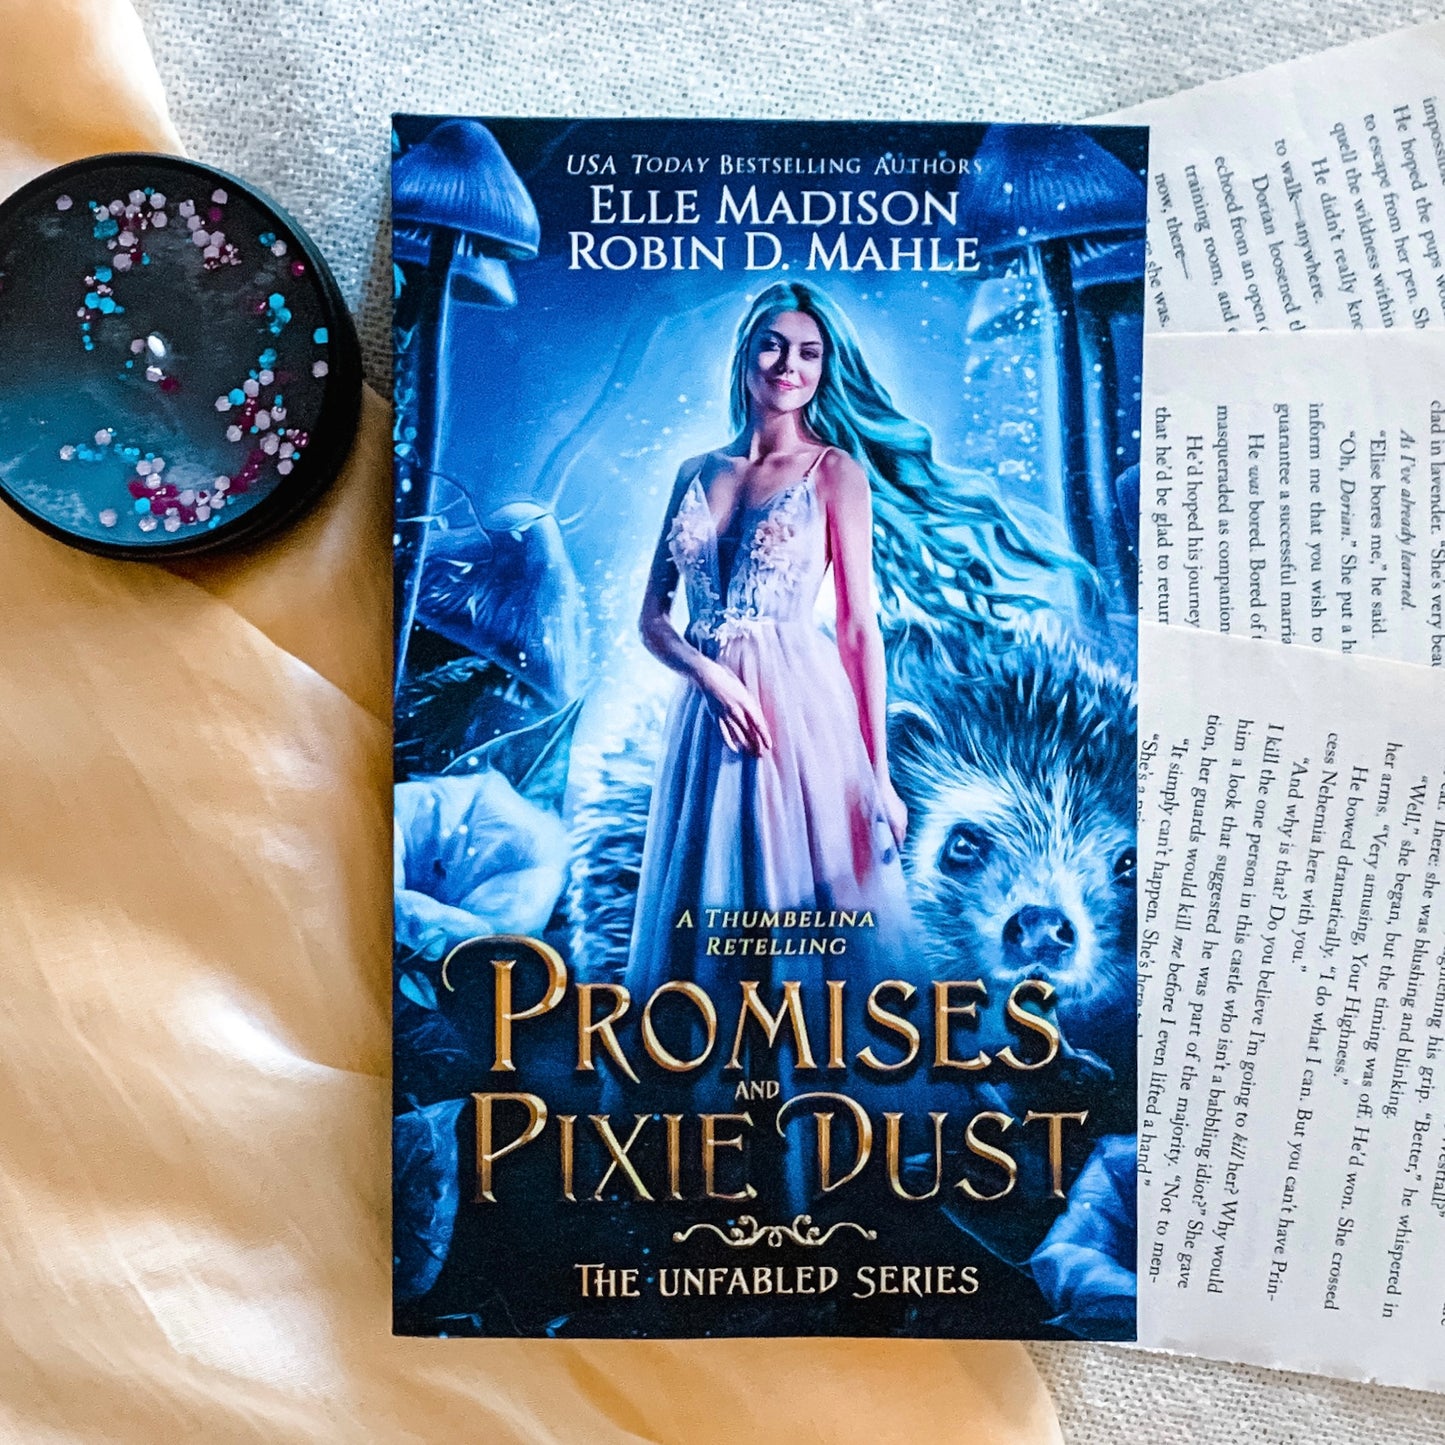 Promises and Pixie Dust by Elle Madison and Robin D. Mahle